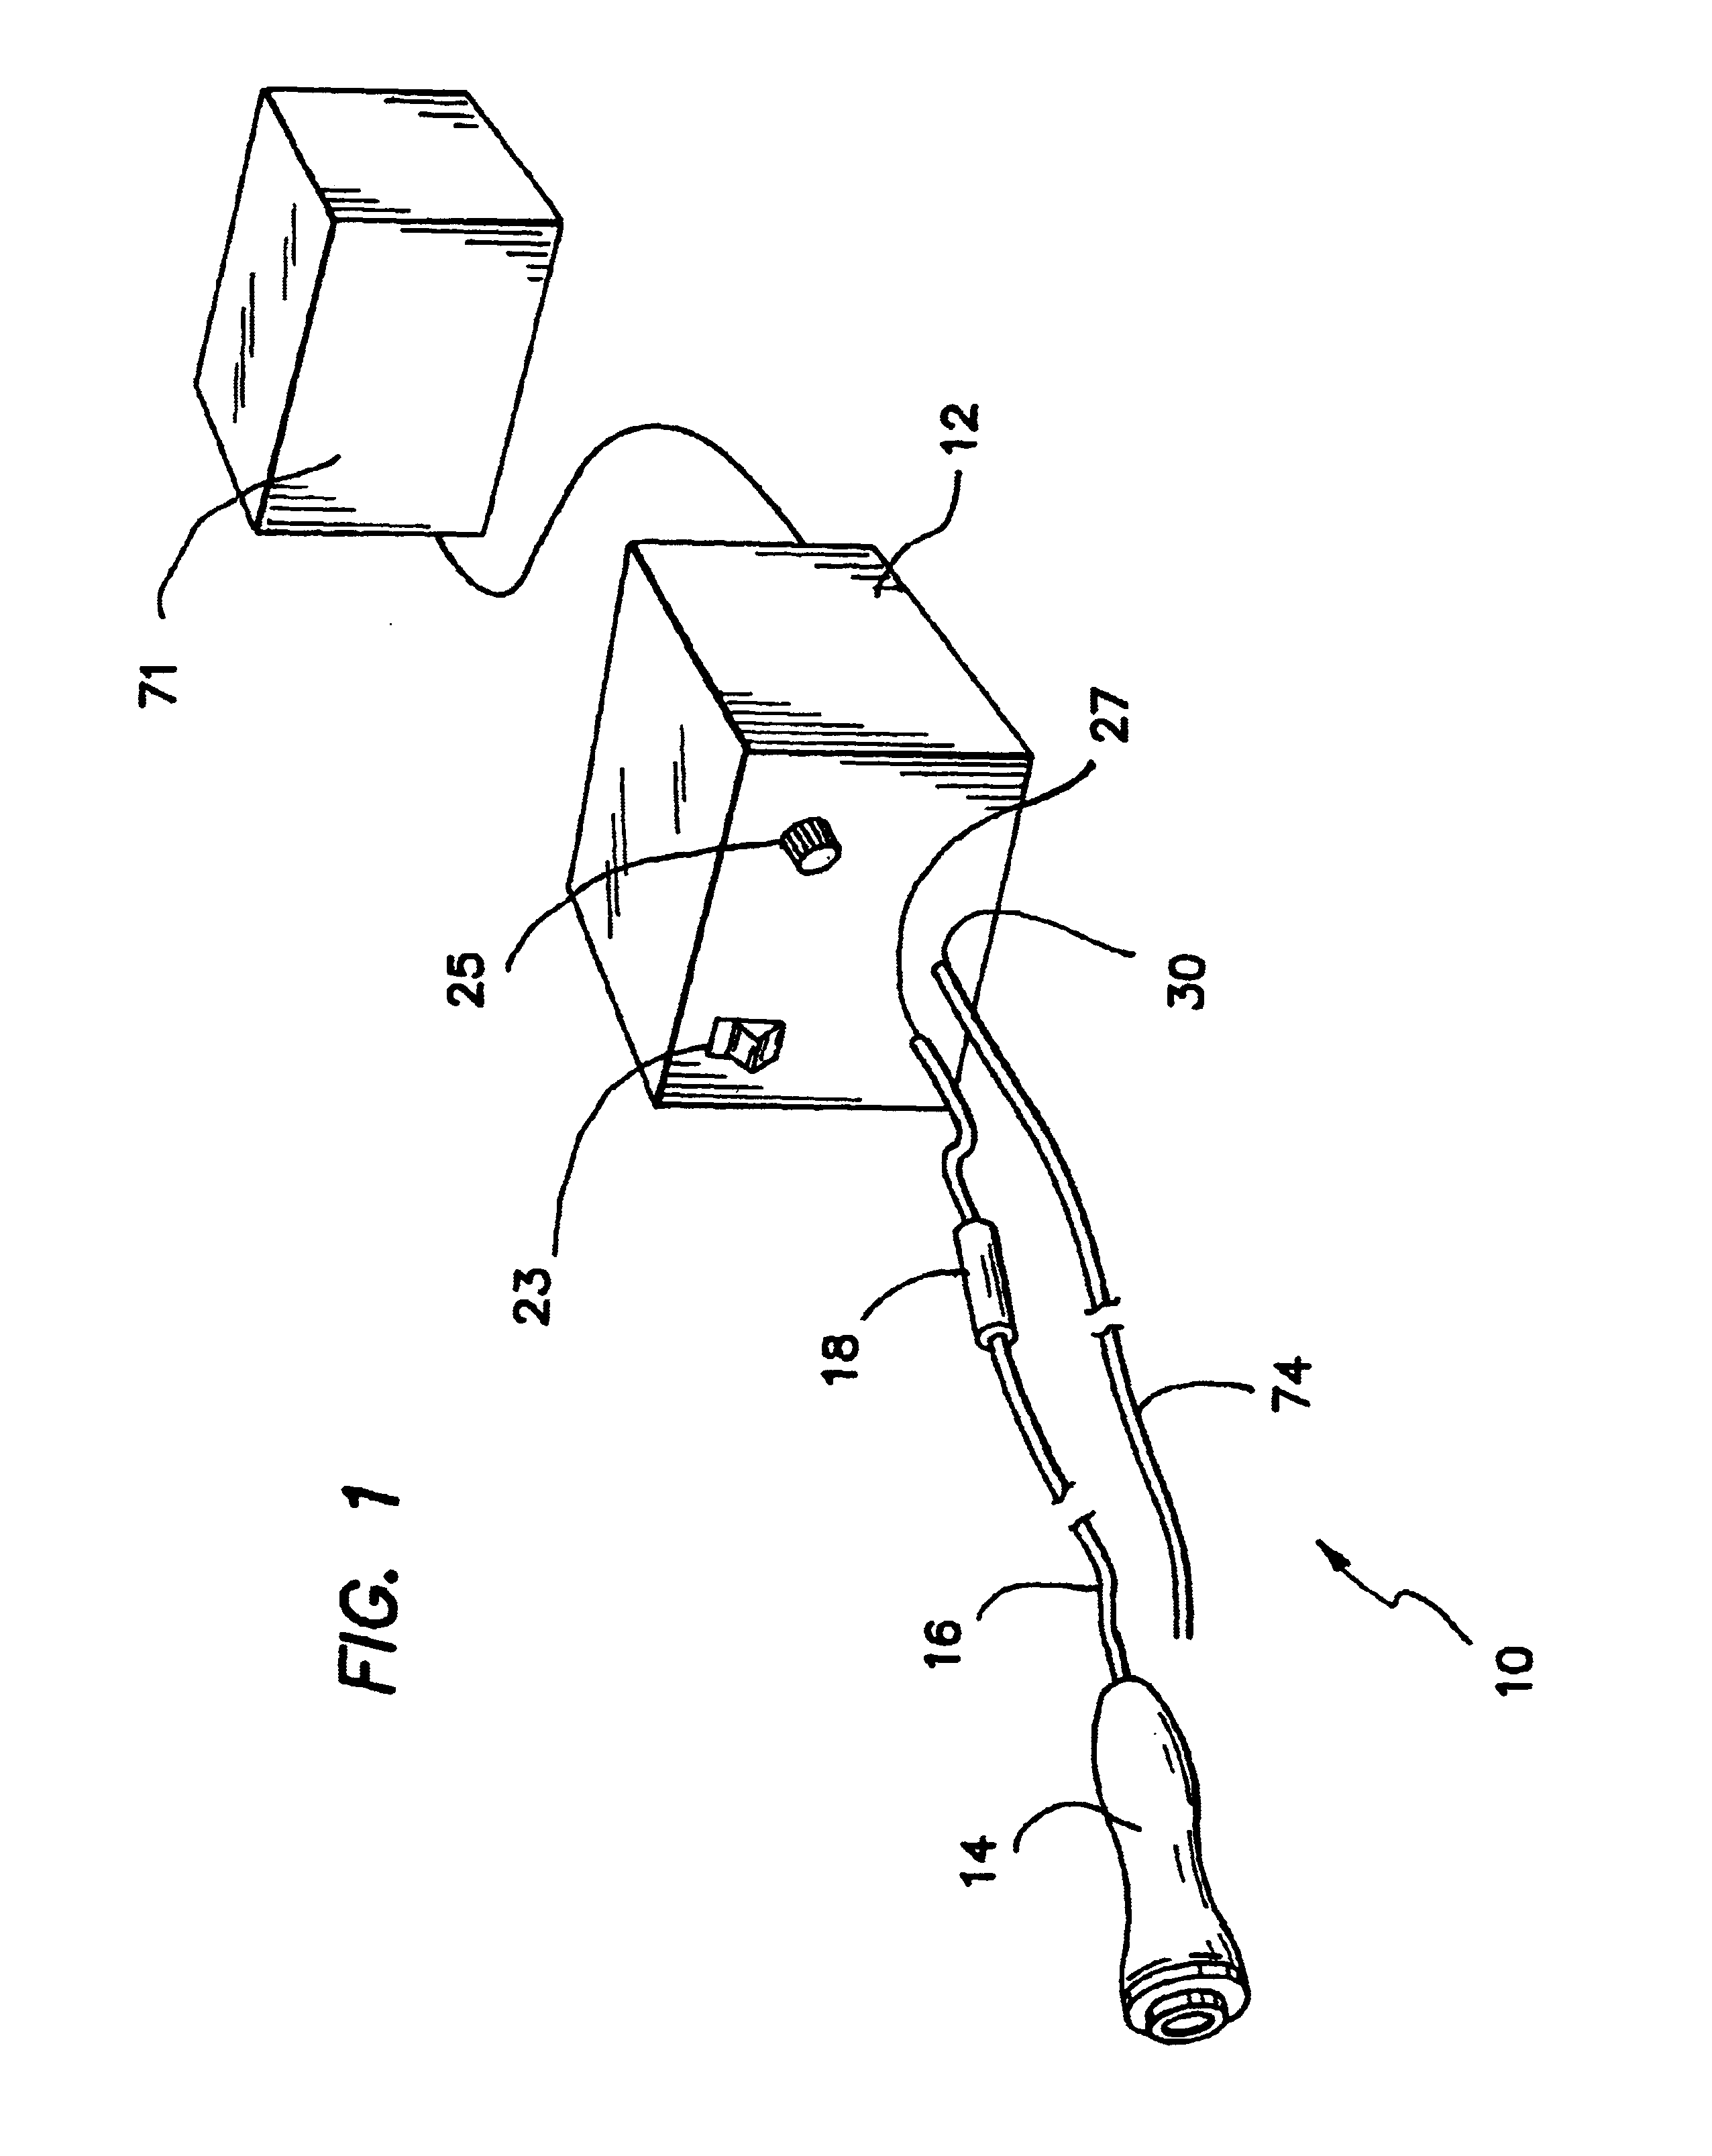 Apparatus and method for skin/surface abrasion